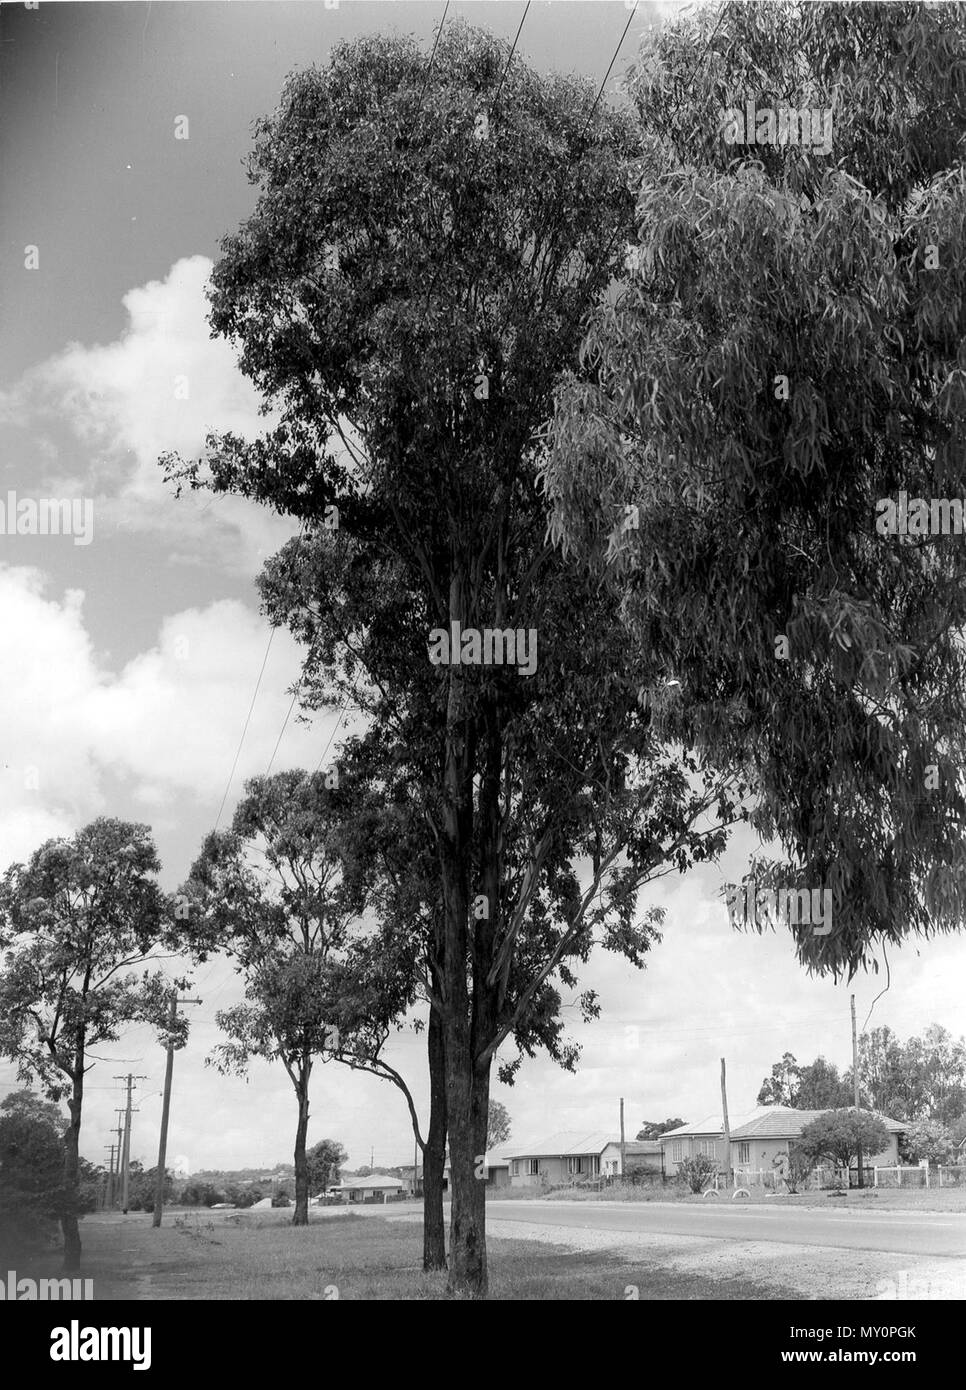 Queensland Housing Commission estate, Rocklea, February 1959. The Telegraph 11 July 1946  State Has 1,333 Building Blocks 188730456 )   Up to June 30 last the Queensland Housing Commission had acquired land totalling 1,333 building allotments in Brisbane, the Minister for Works and Housing (Mr Bruce) announced today.  The lands were located as follows: Ashgrove, 99 allotments; Banyo, 11; Camp Hill, 17; Cannon Hill, 11; Chermside-Wavell Heights, 261; Coorparoo, 187; Corinda-Graceville, 20; Enoggera-Gaythorne-Mitchelton, 228; Fairfield-Yeronga, 25, Indooroopilly-Taringa, 22; Kedron, 20; Wynnum-M Stock Photo